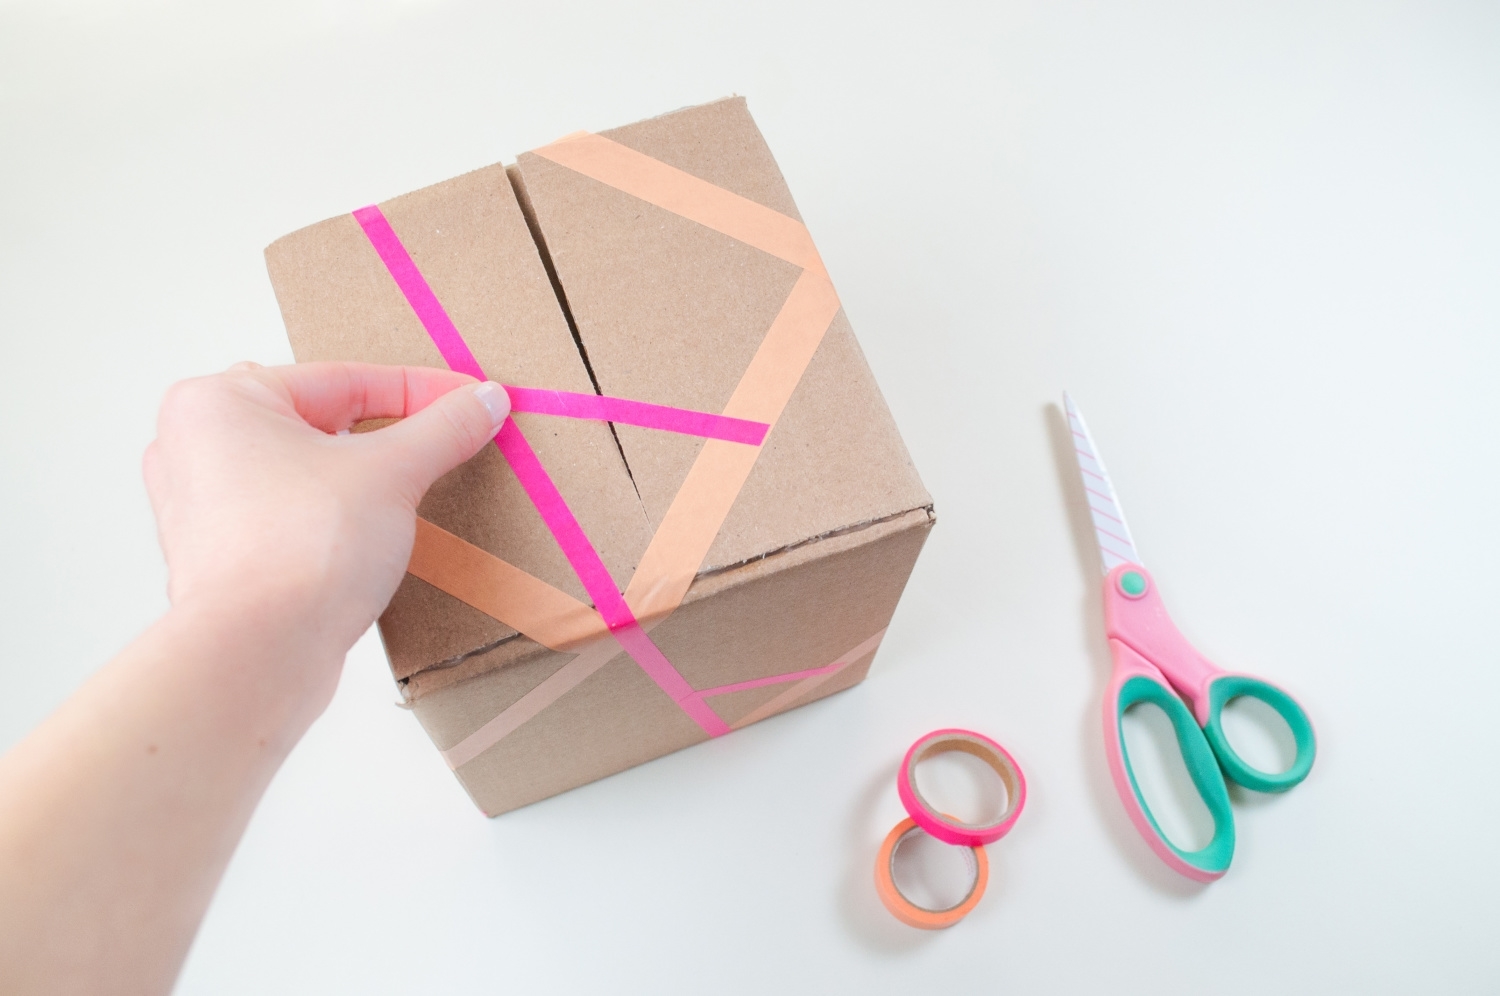 Create abstract patterns with washi tape